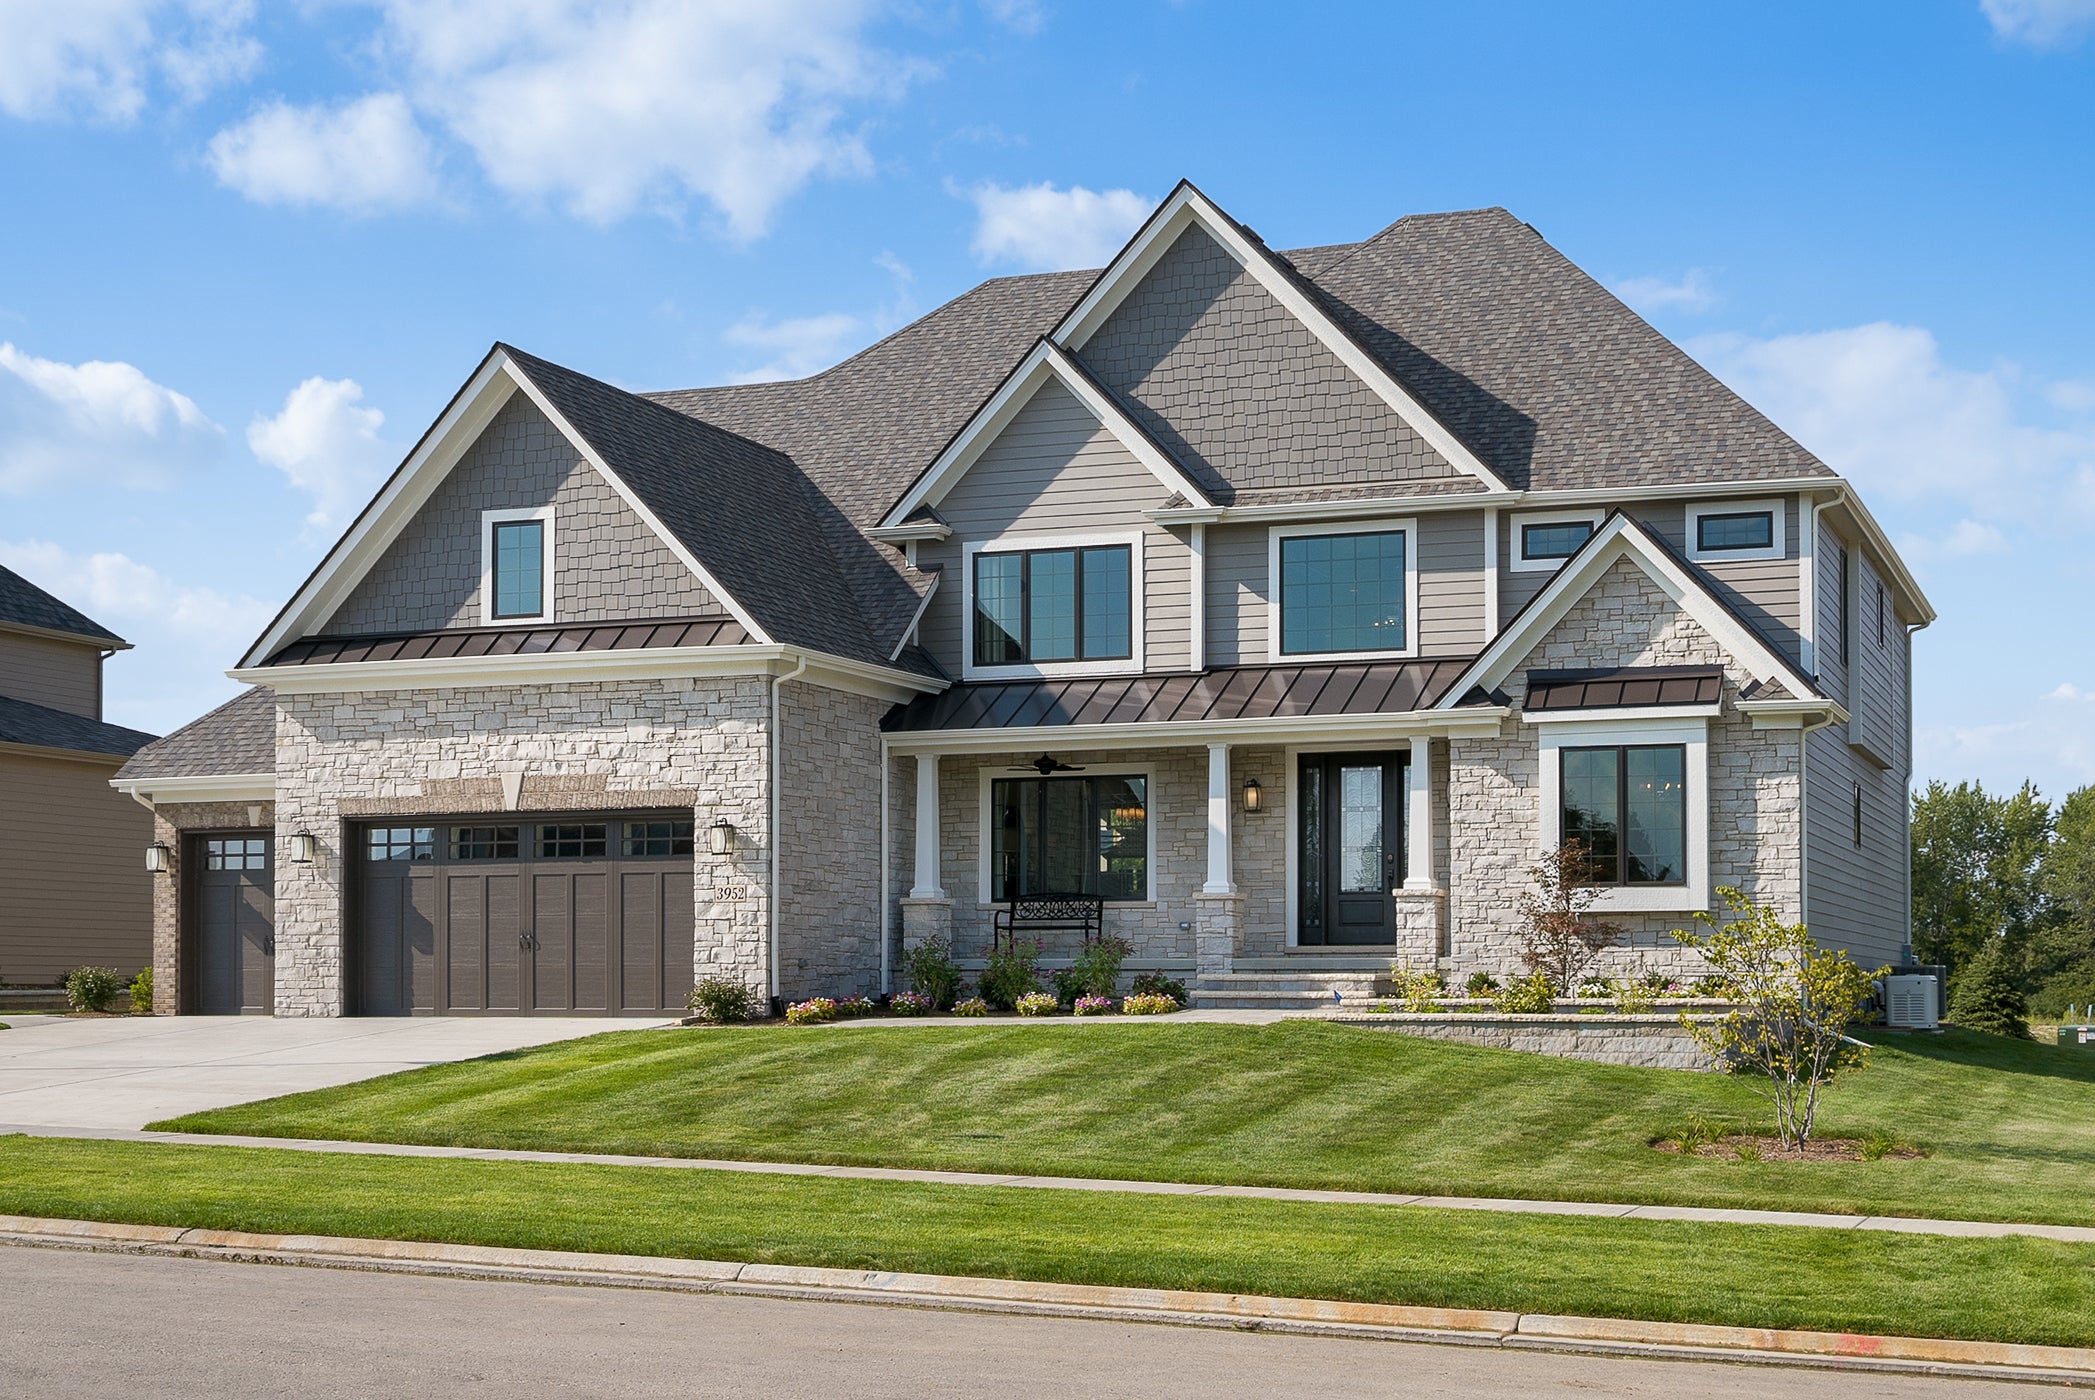 5 Reasons to Choose Overstreet Builders to Build Your New Chicago Area Home